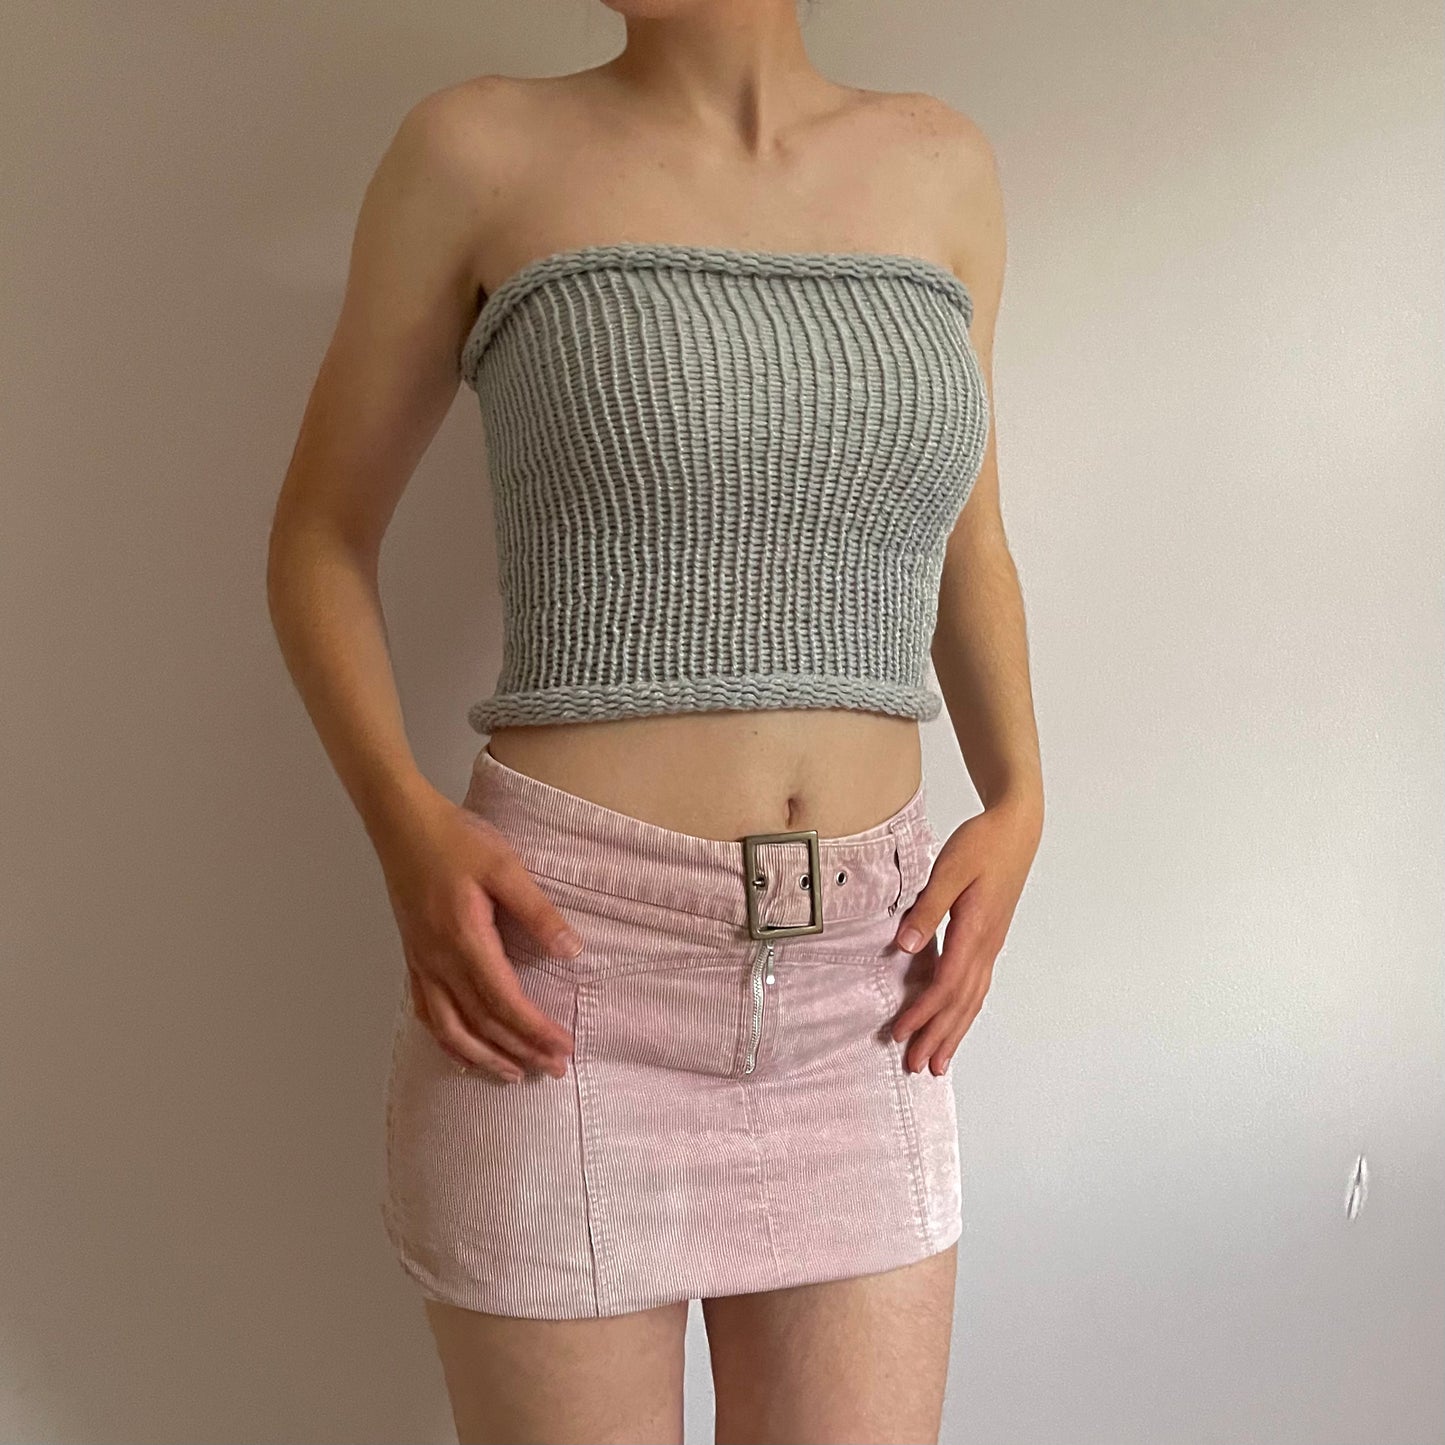 Handmade knitted bandeau top in pebble grey